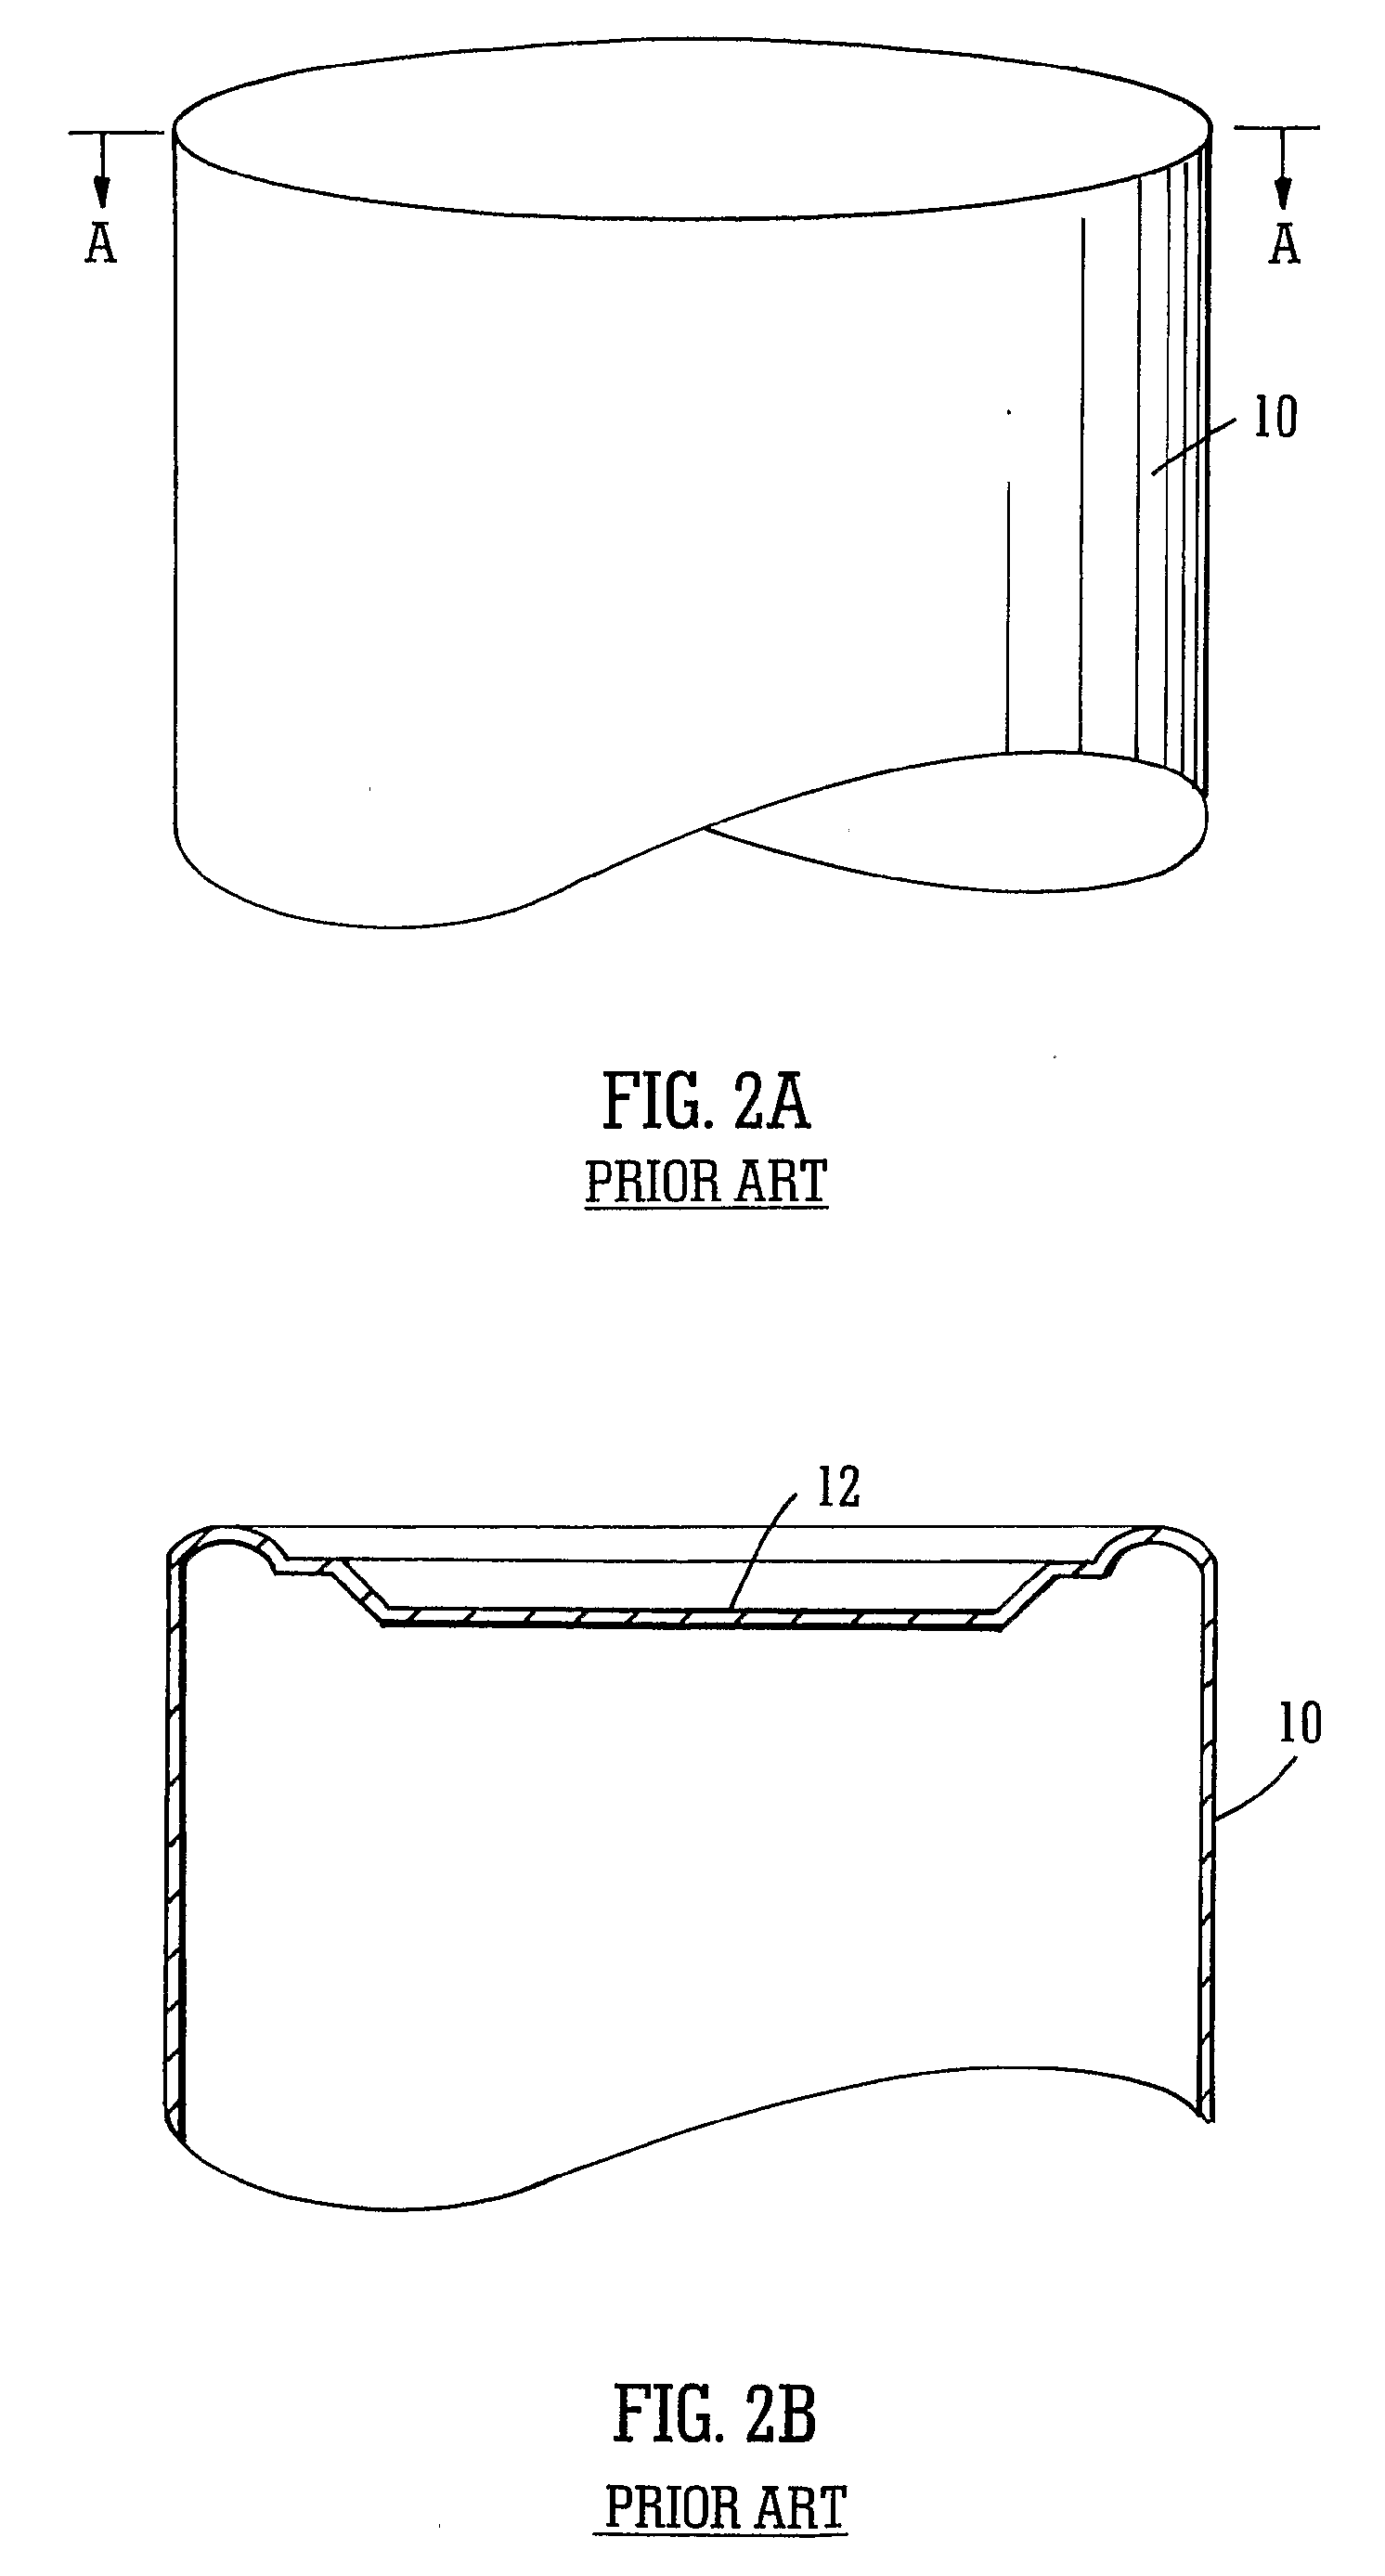 Method of Attaching an Rfid Tag to a Component, a Component Comprising an Rfid Tag and Rfid Tag